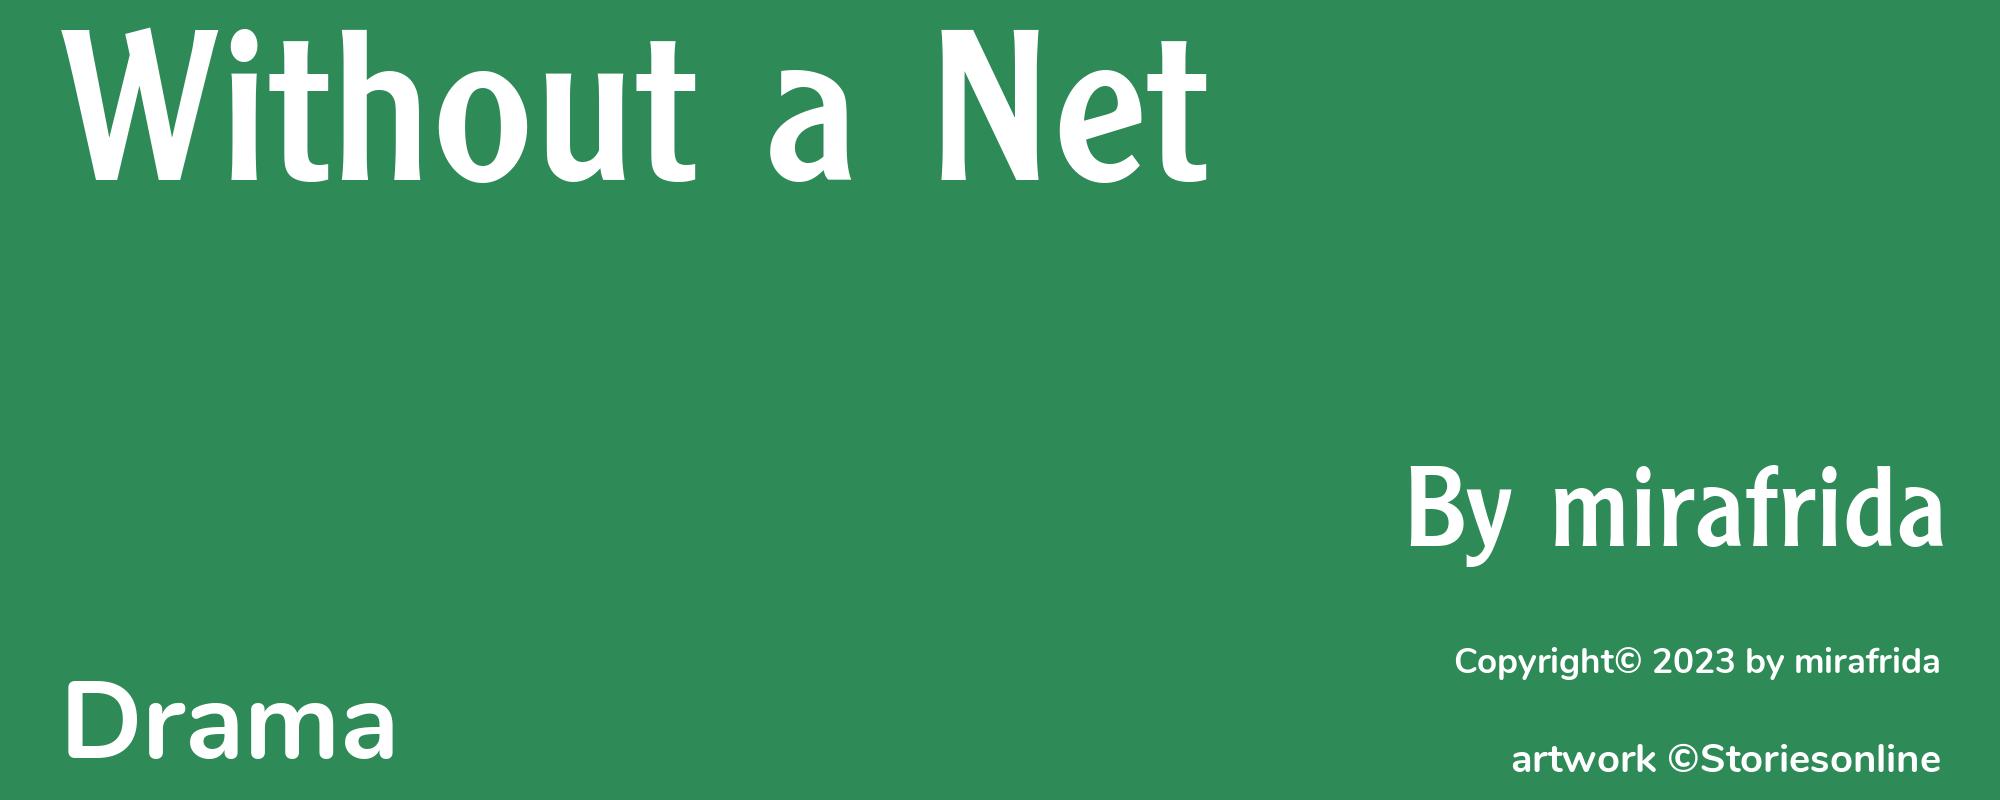 Without a Net - Cover